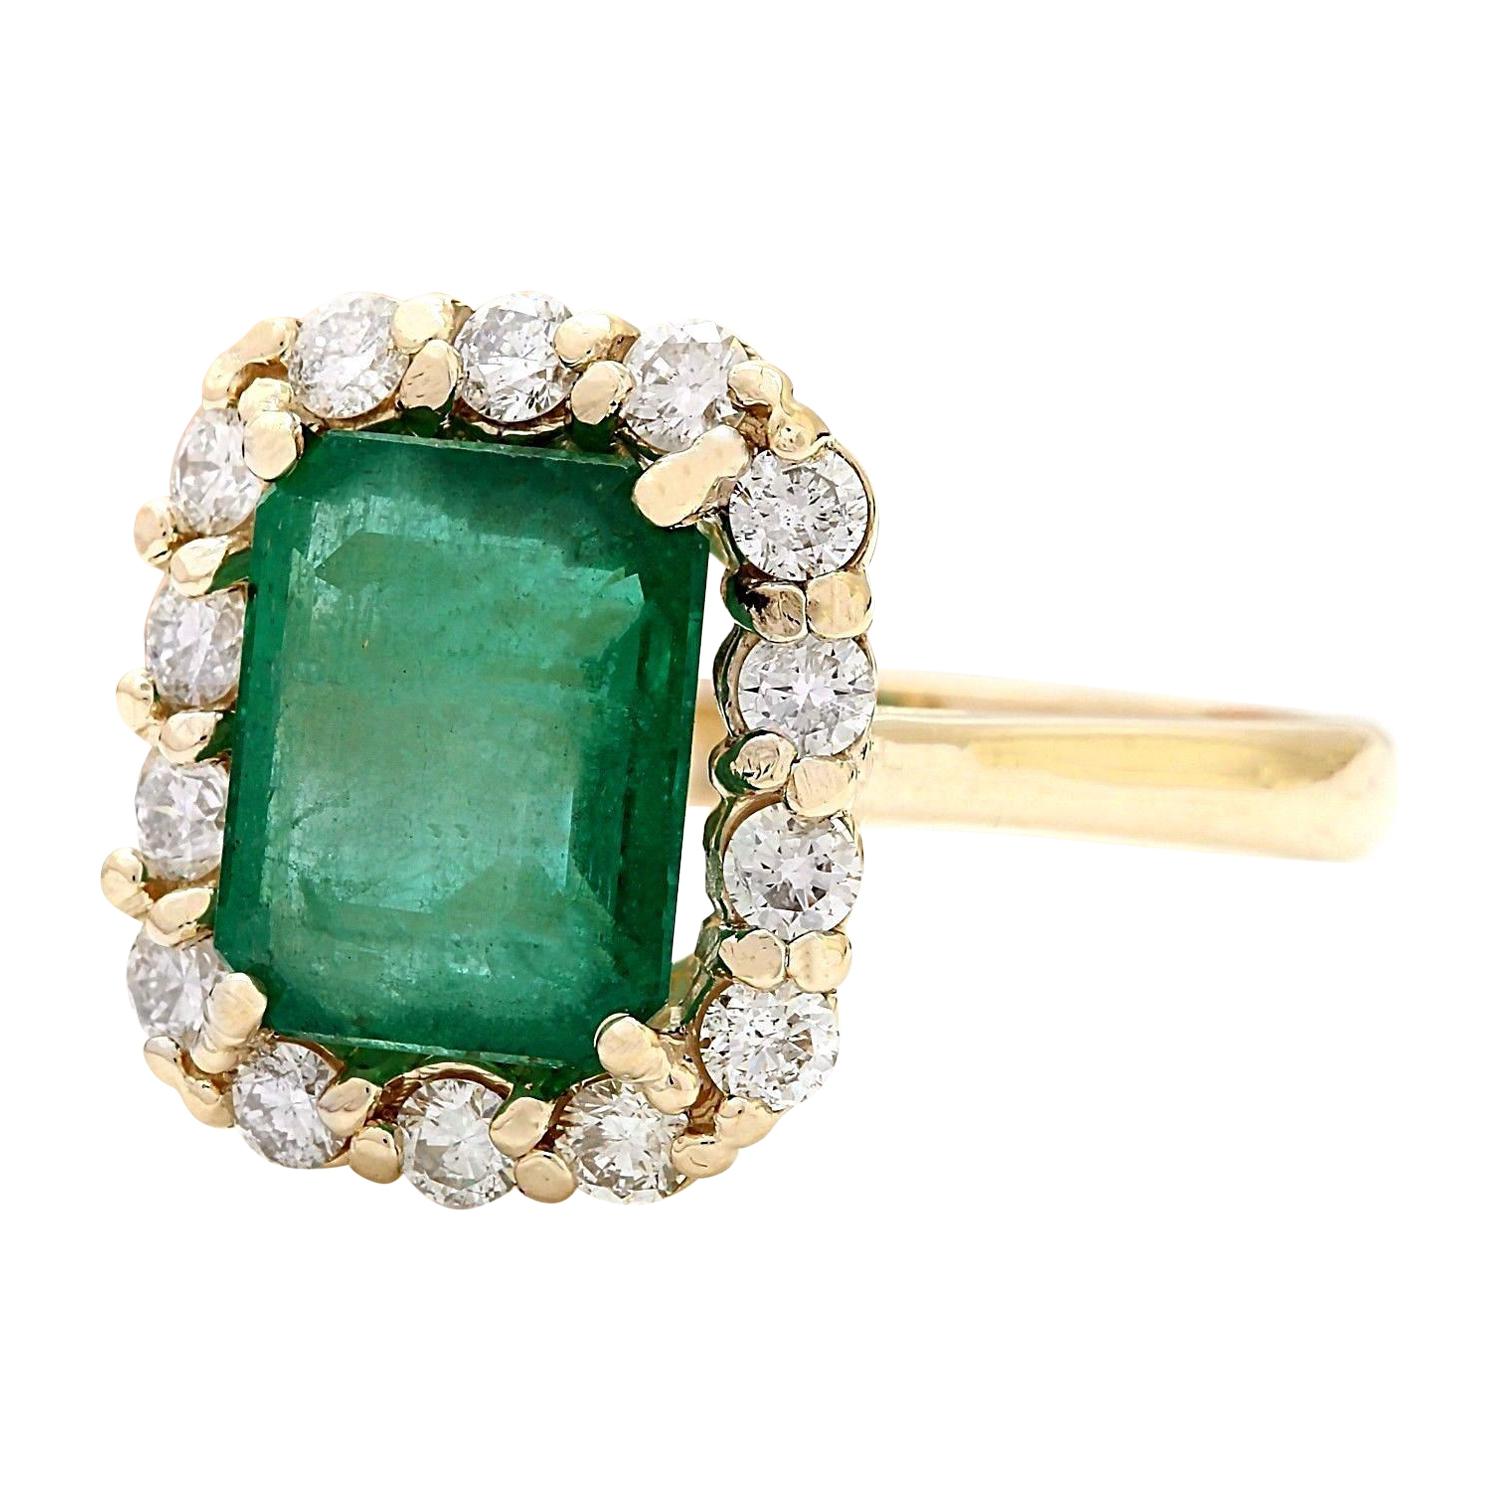 4.50 Carat Natural Emerald 14K Solid Yellow Gold Diamond Ring
 Item Type: Ring
 Item Style: Engagement
 Material: 14K Yellow Gold
 Mainstone: Emerald
 Stone Color: Green
 Stone Weight: 3.50 Carat
 Stone Shape: Princess
 Stone Quantity: 1
 Stone